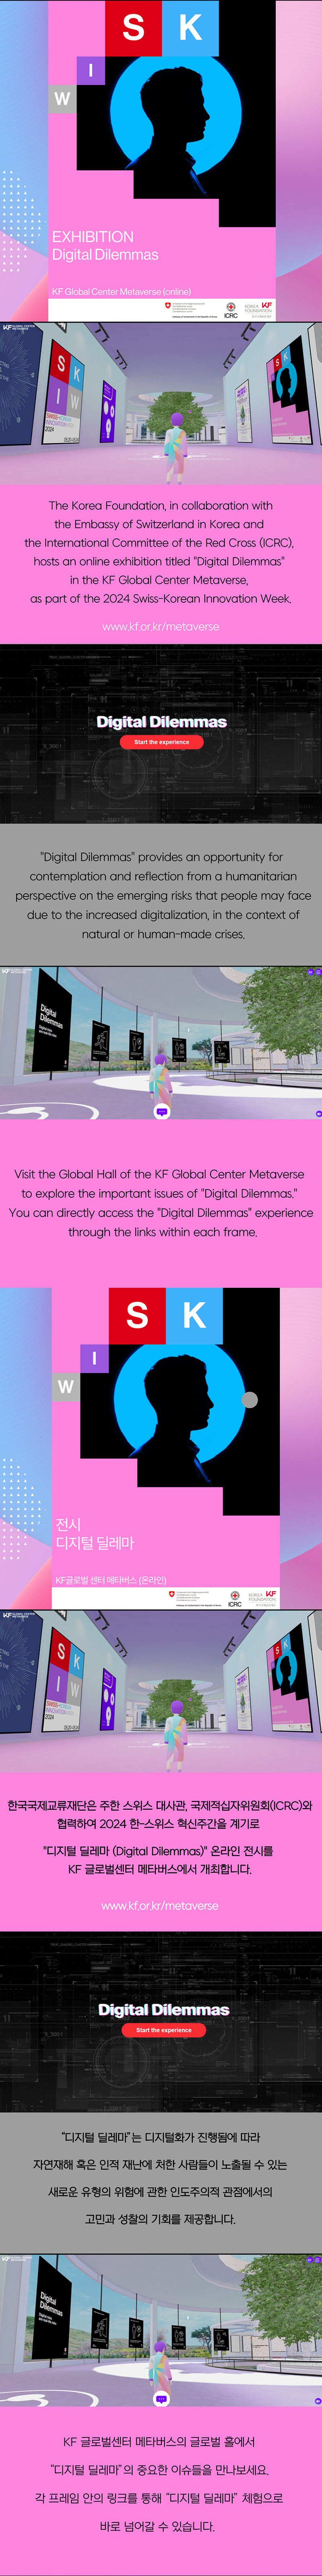 The Korea Fountaion, in collaboration with wht  Embassy of Switzerland in korea and the international Committee of the Red Cross(ICRC), hosts an online exhibition titled 'Digital Dilemmas' in the KF Global Center Metaverse,  as part of the 2024 Swiss-korean innovation Week ( www.kf.or.kr/metaverse ) Digital Dilemmas provides an opporunity of contemplation and reflextion from a humanitarian perspective on the emerging risks that people may face due to the increased digitalization, in the context of natural or human-made crises